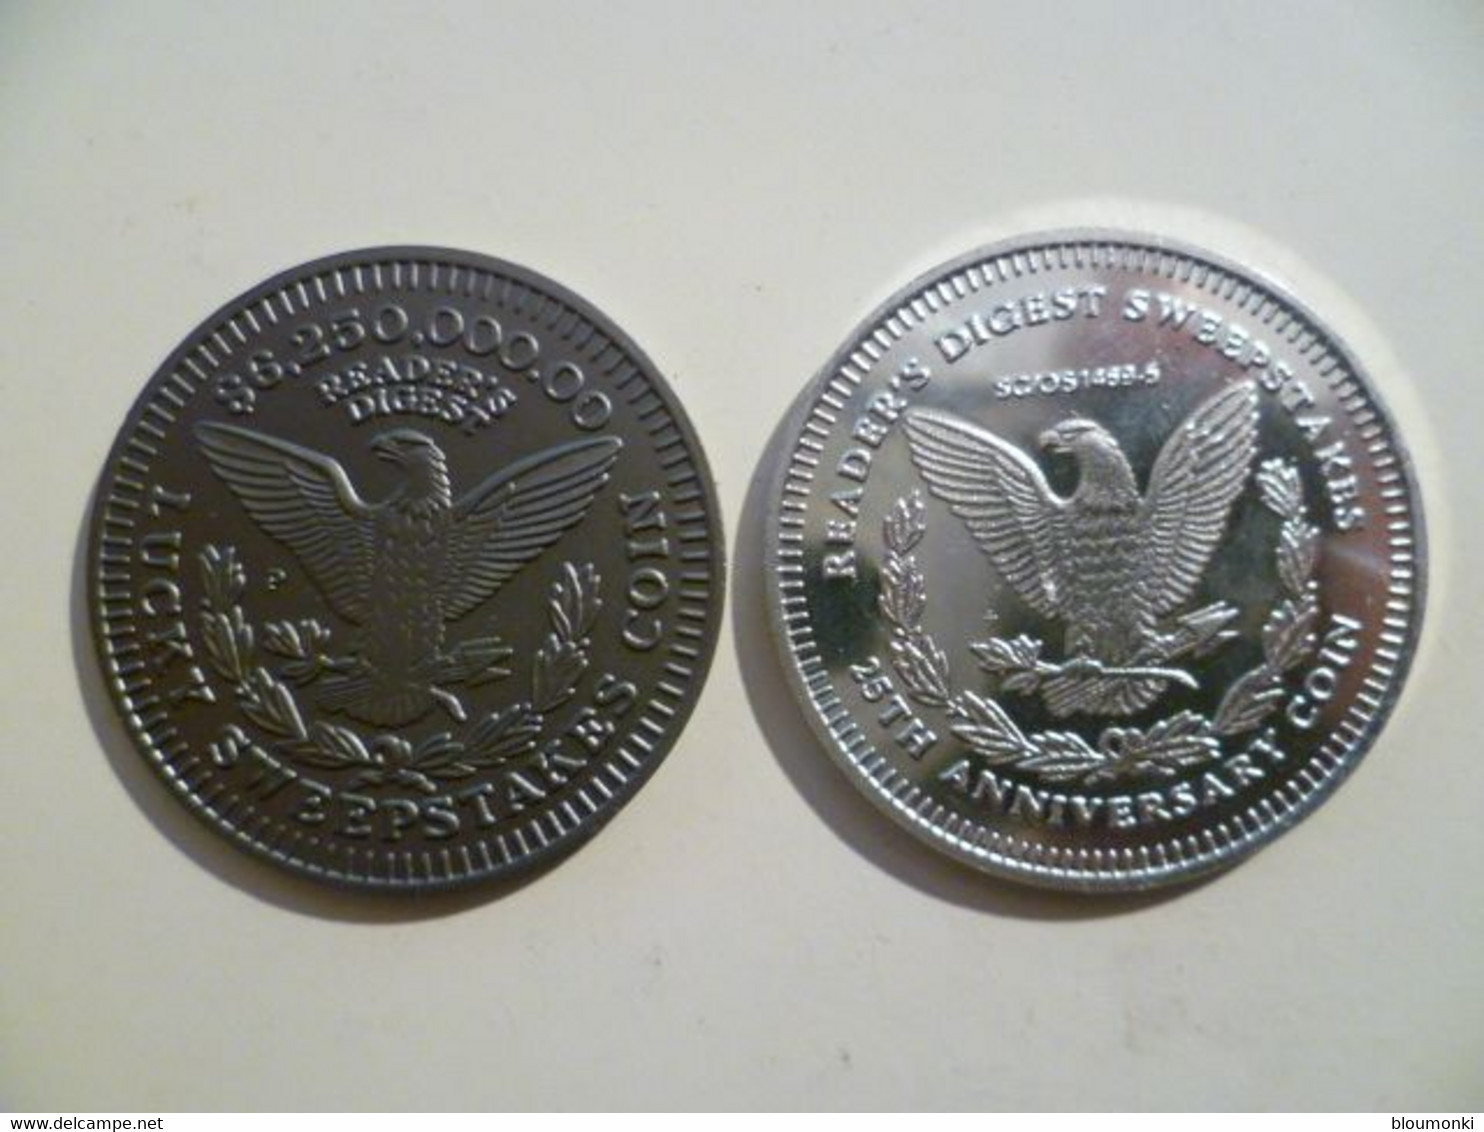 Lot De 2 Médailles  / Reader's Digest Sweepstakes 25th Anniversary & Lucky Sweepstakes Coin - Firmen